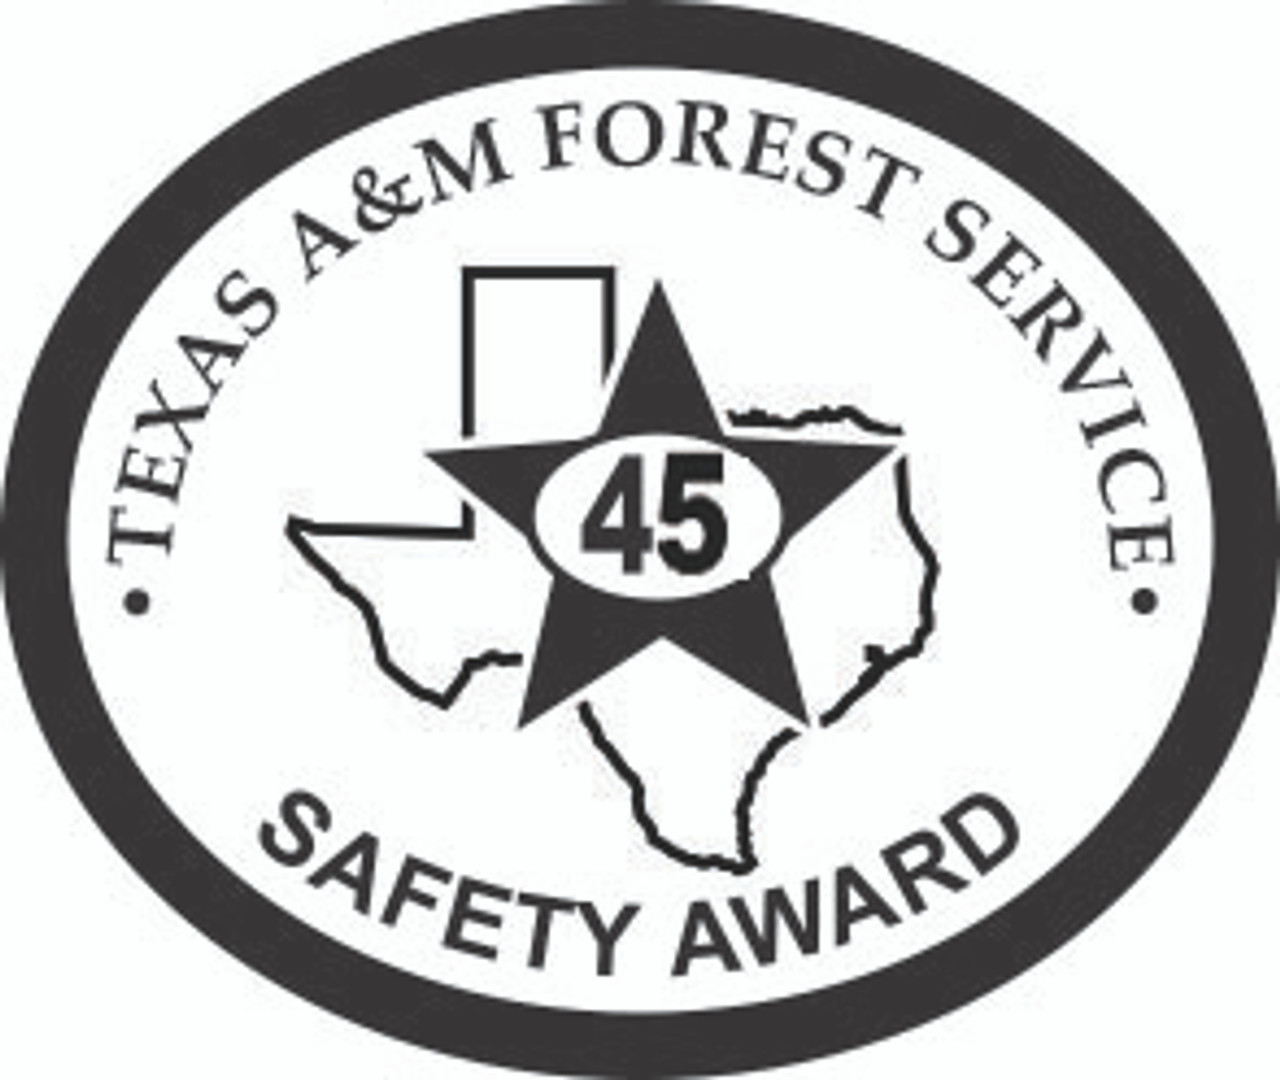 Texas A&M Forest Service Safety Award 45 Year  Buckle (RESTRICTED)